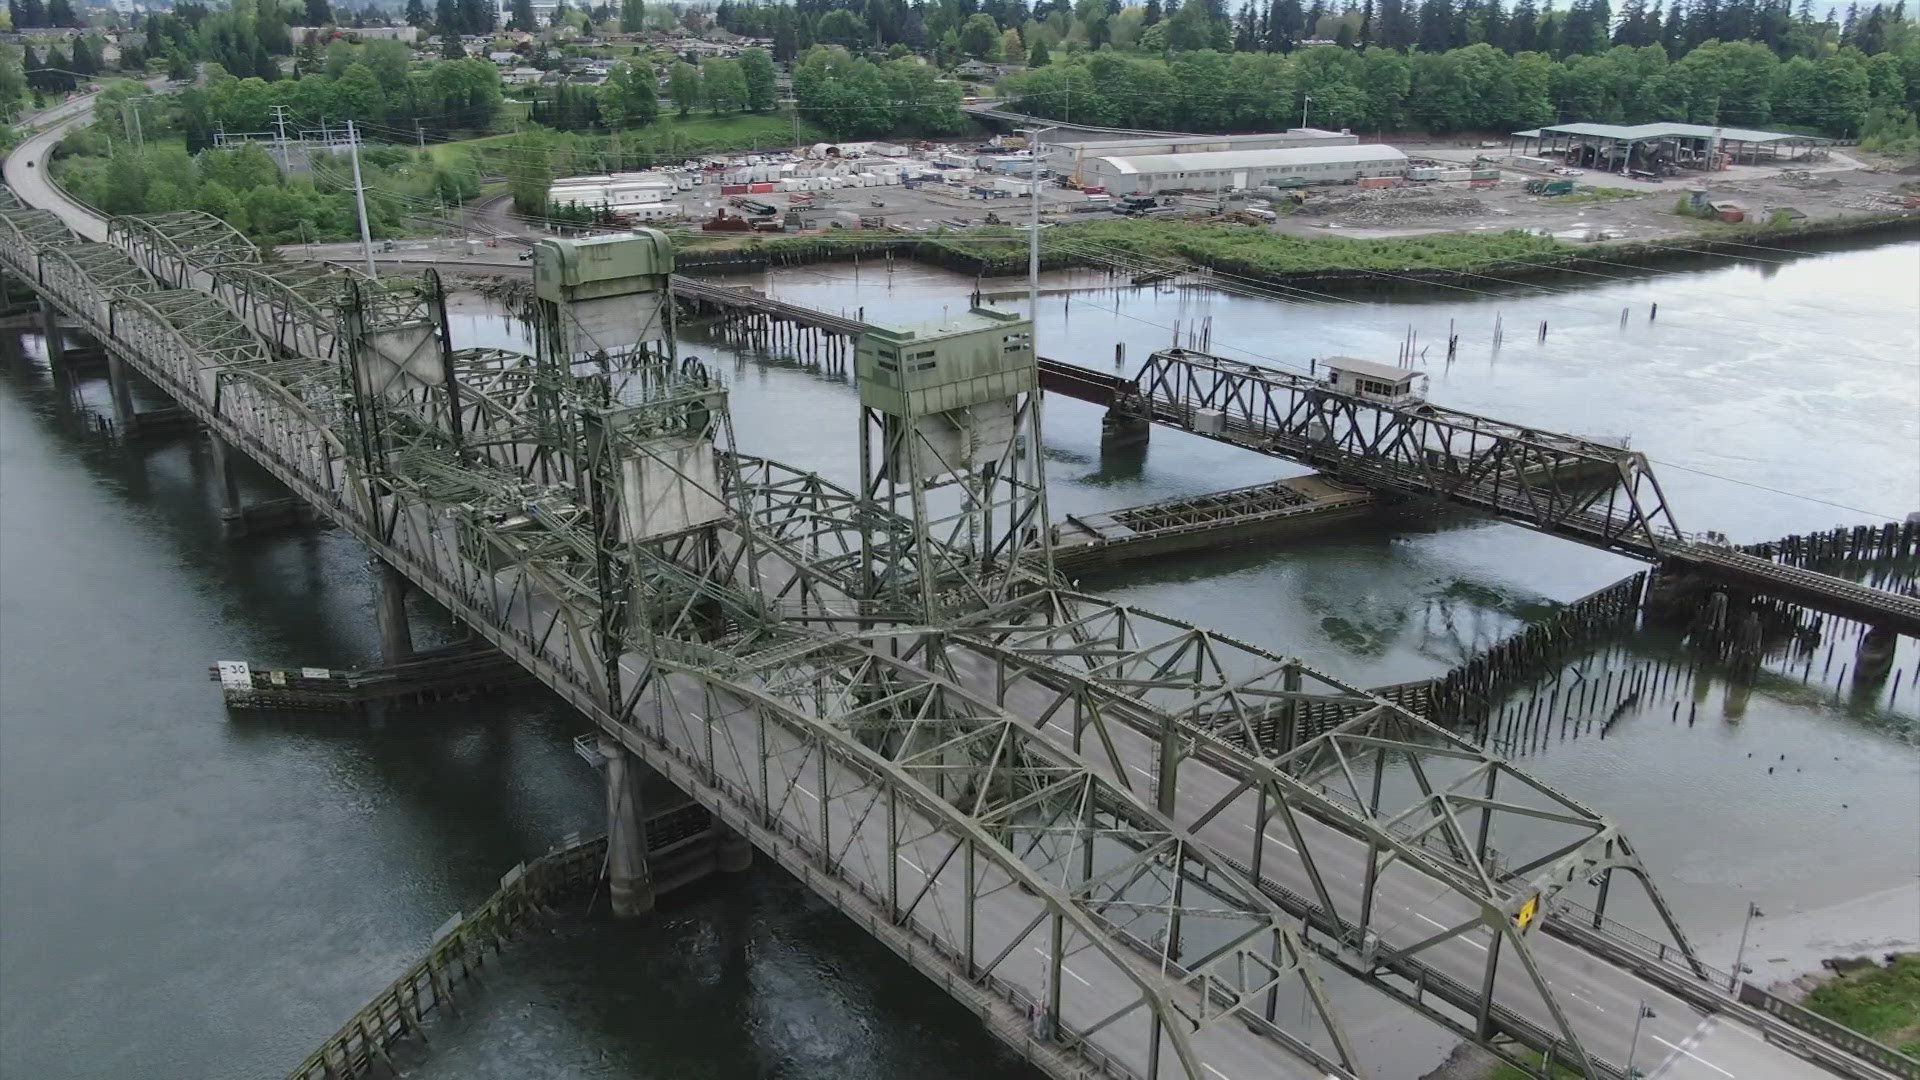 For the next few months, drivers on the northbound side of the SR-529 Snohomish River bridge should expect delays as rehabilitation work is being done by WSDOT